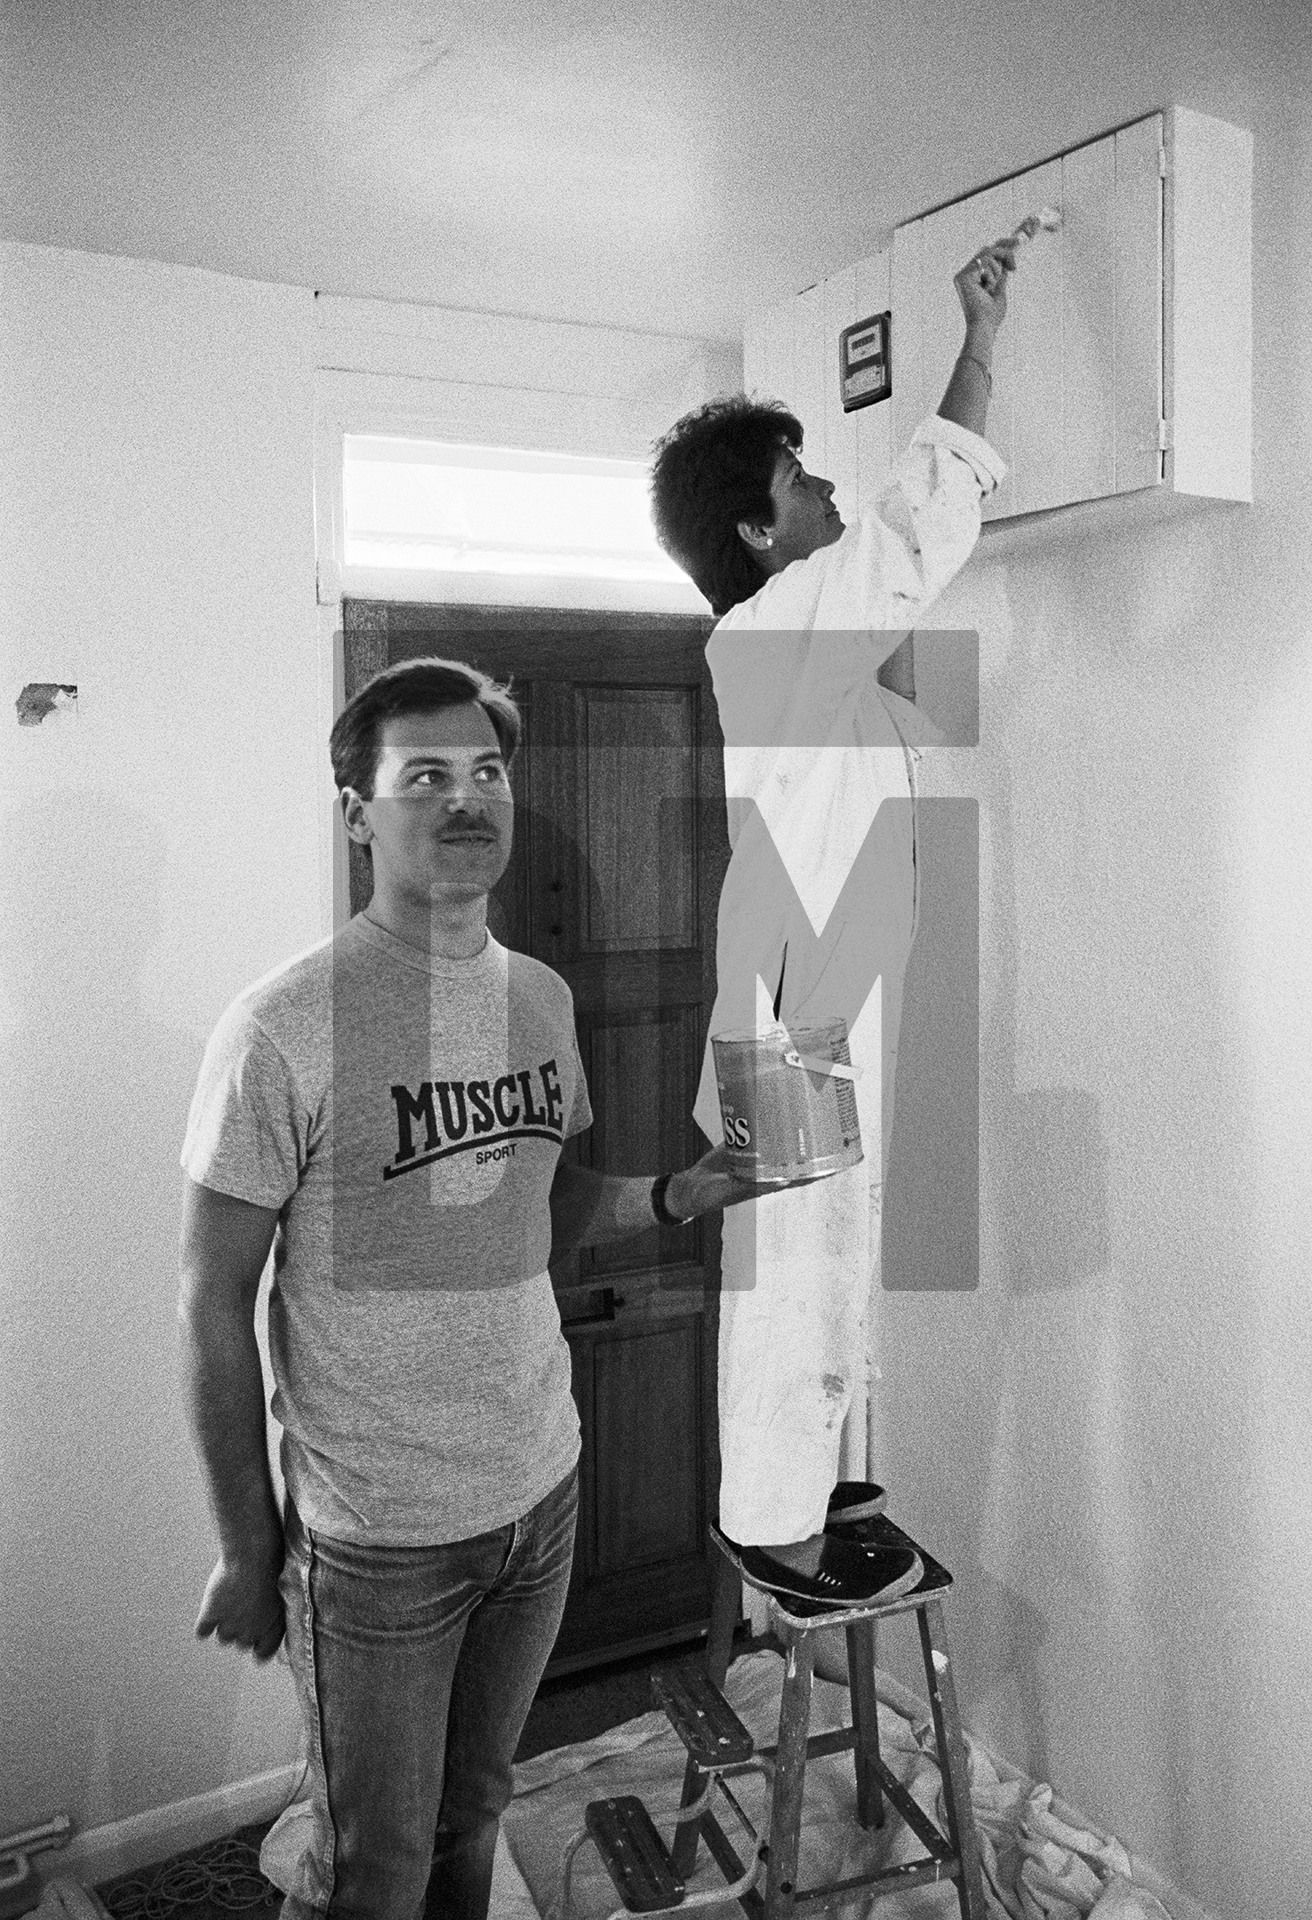 Decorating their first home, Napier Road, Bromley. July 1984 by Daniel Meadows